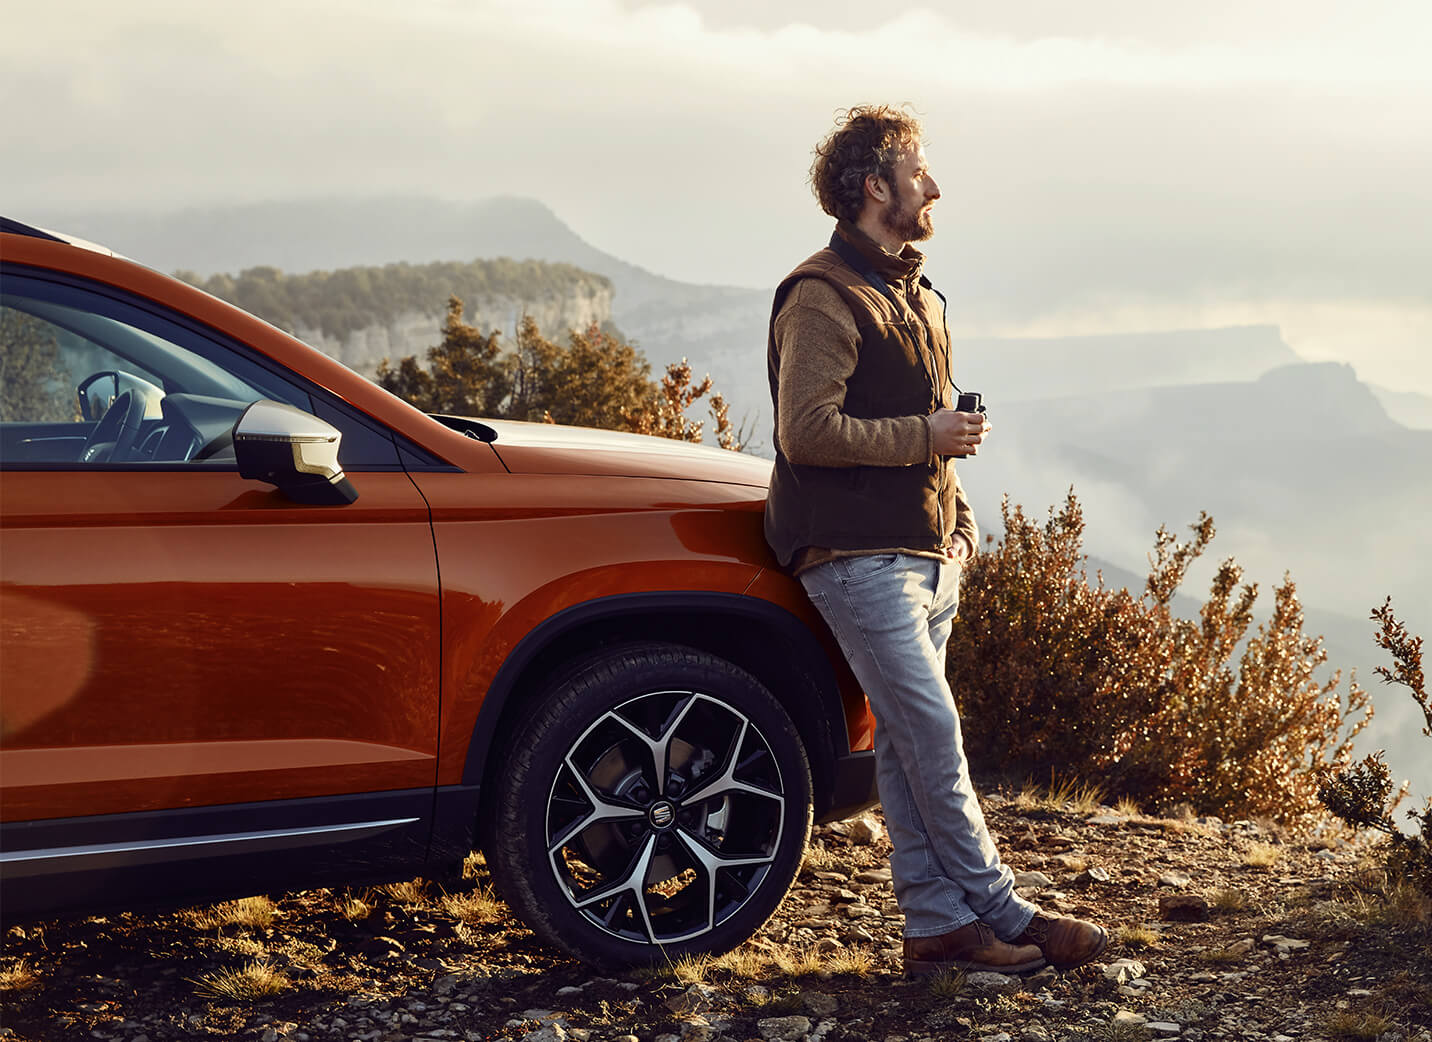 SEAT new car services and maintenance – SEAT Arona crossover SUV parked overlooking a valey with man leaning on the car